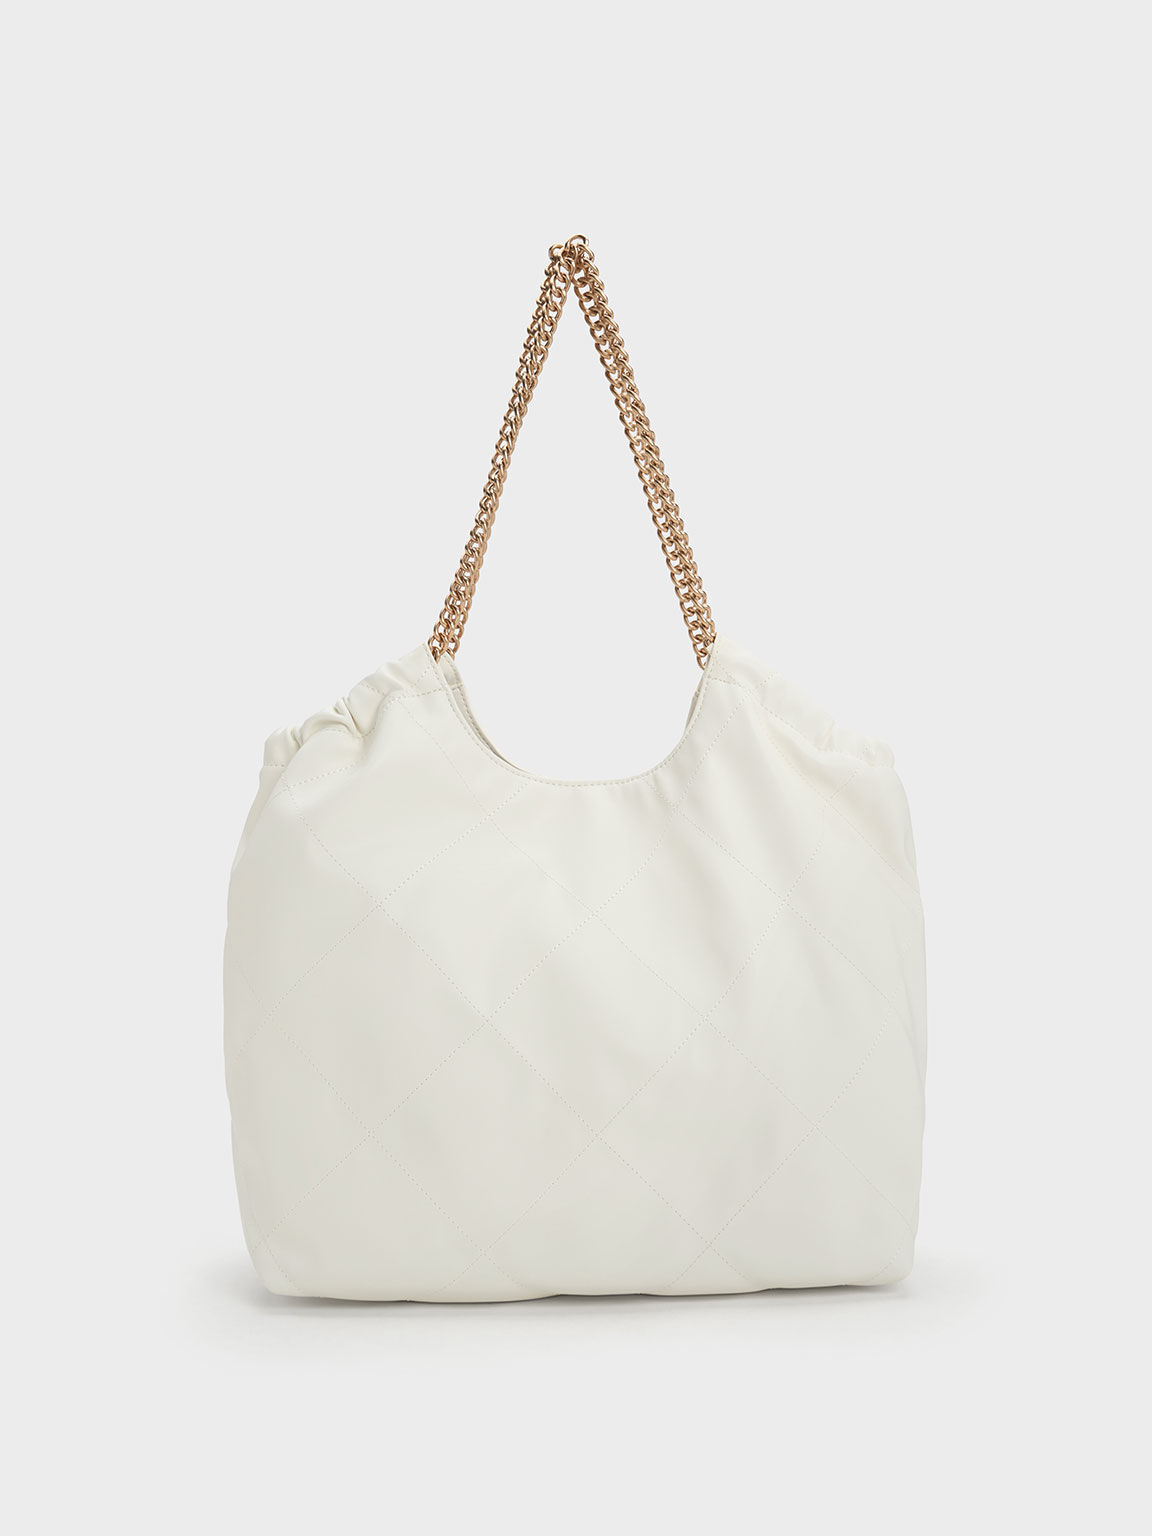 Designer Bags for Women - Shop Now on FARFETCH